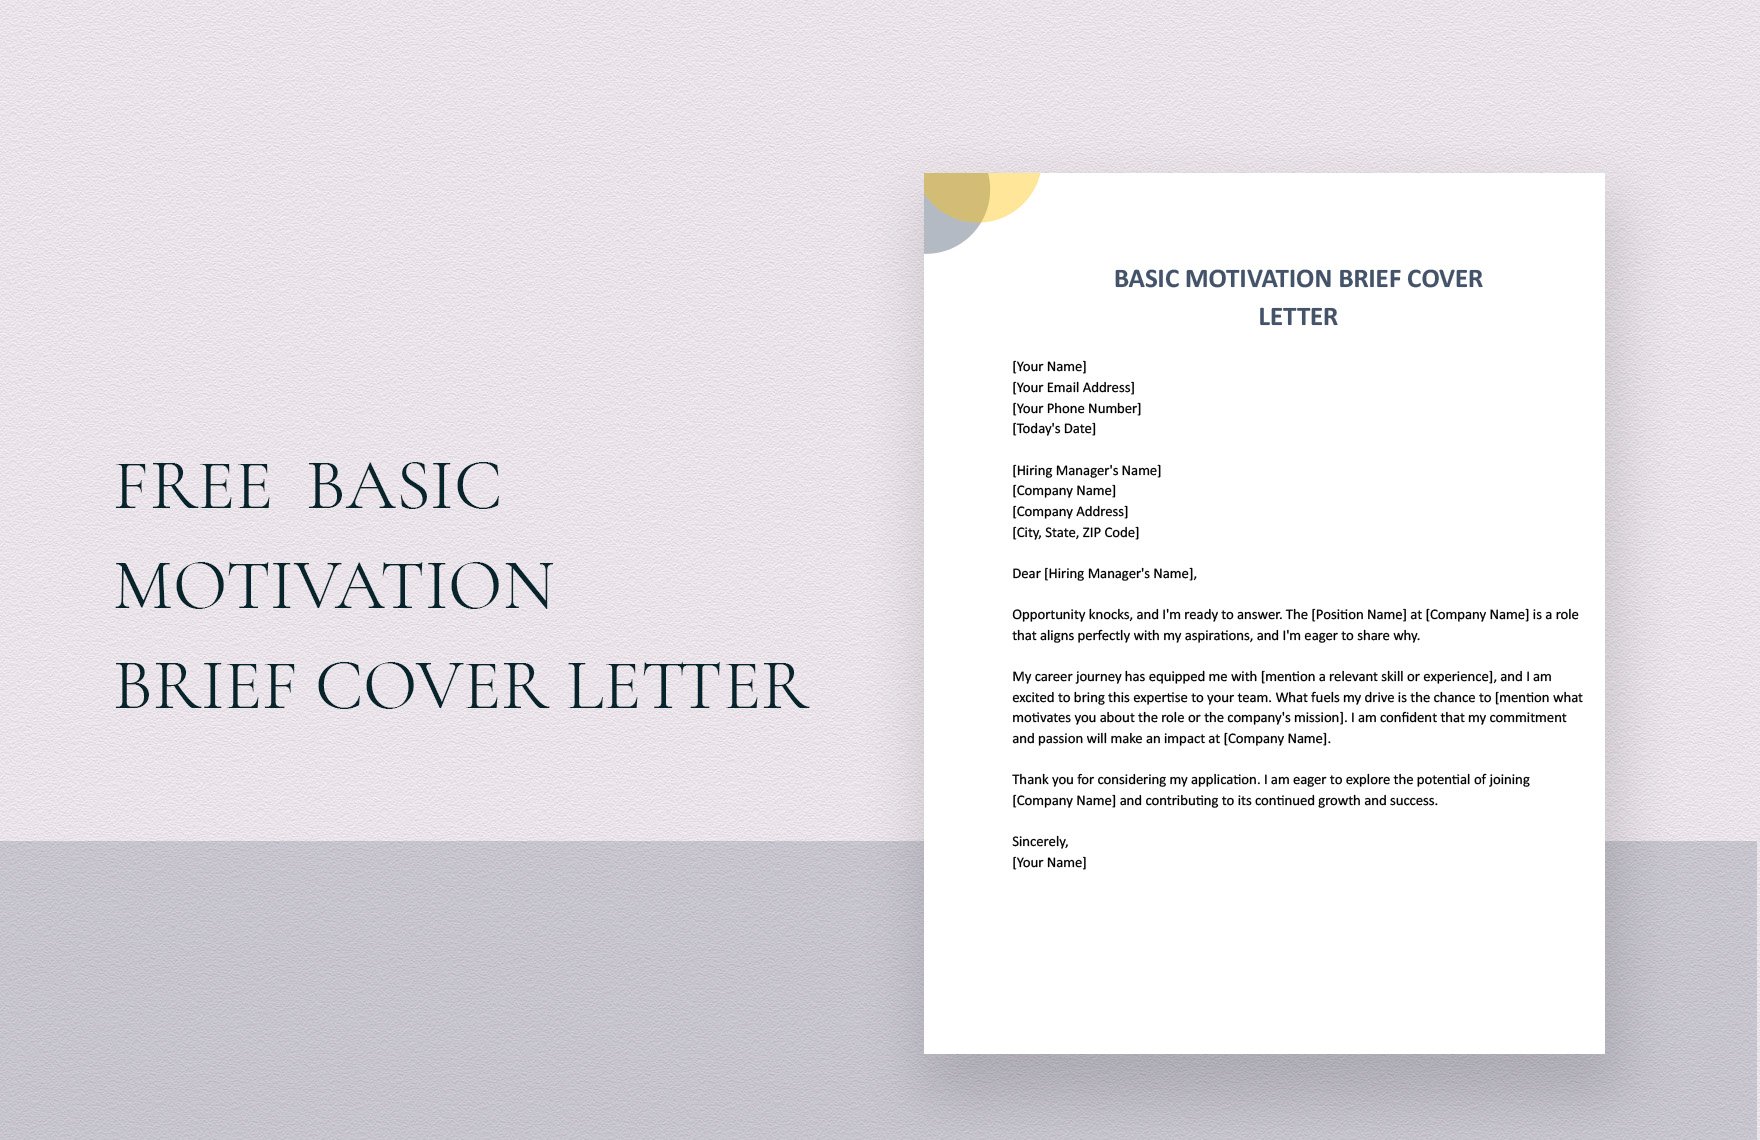 Basic Motivation Brief Cover Letter Template